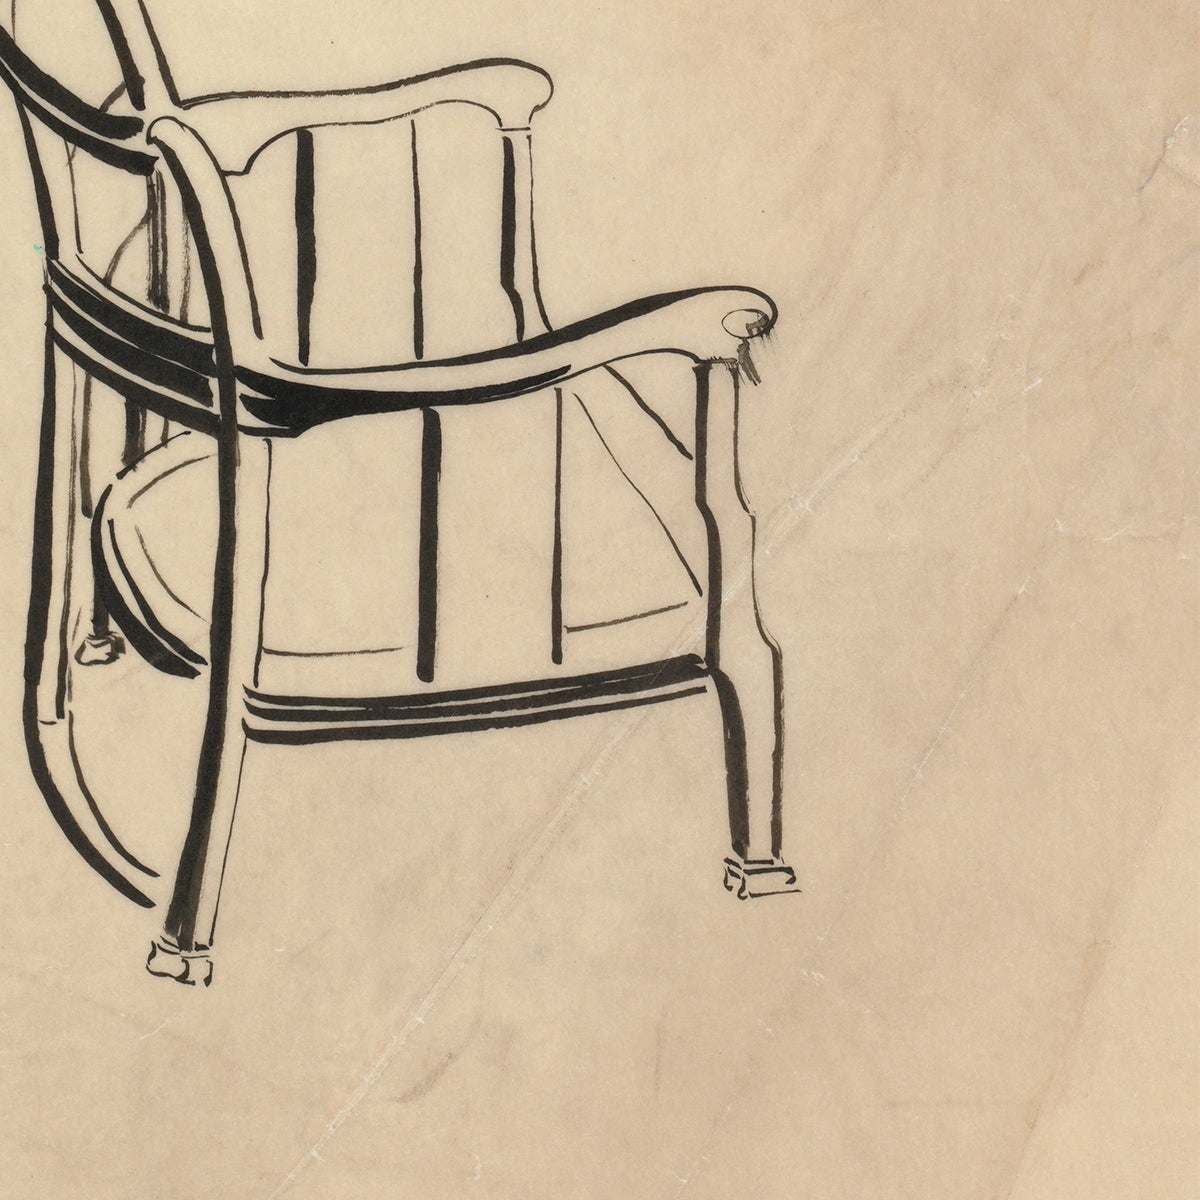 DESIGN FOR A MONUMENTAL BENCH